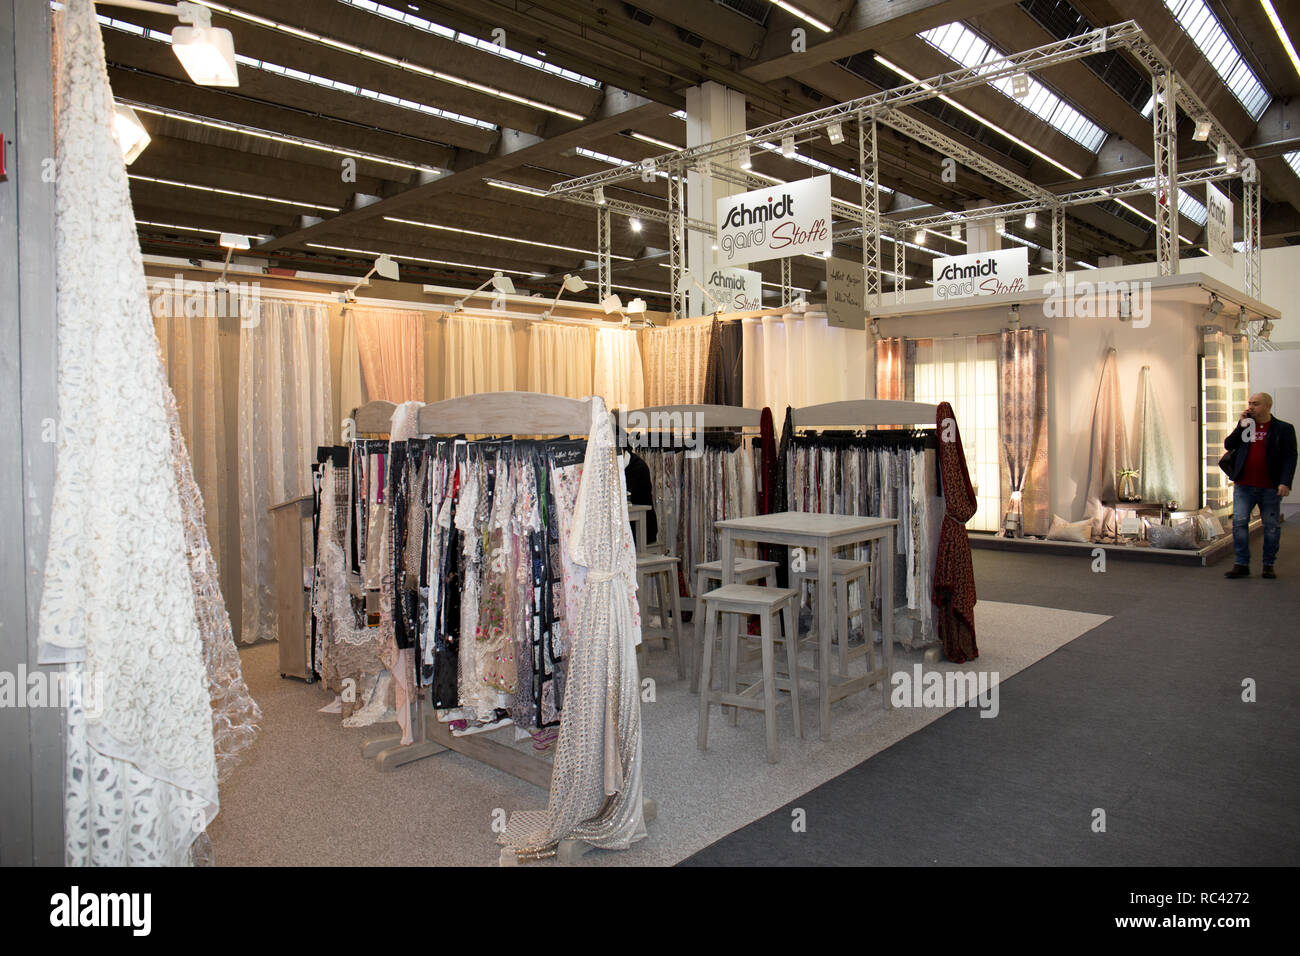 impressions of the biggest international leading trade fair for home and contract textiles and the global benchmark for quality design in ffm germany Stock Photo